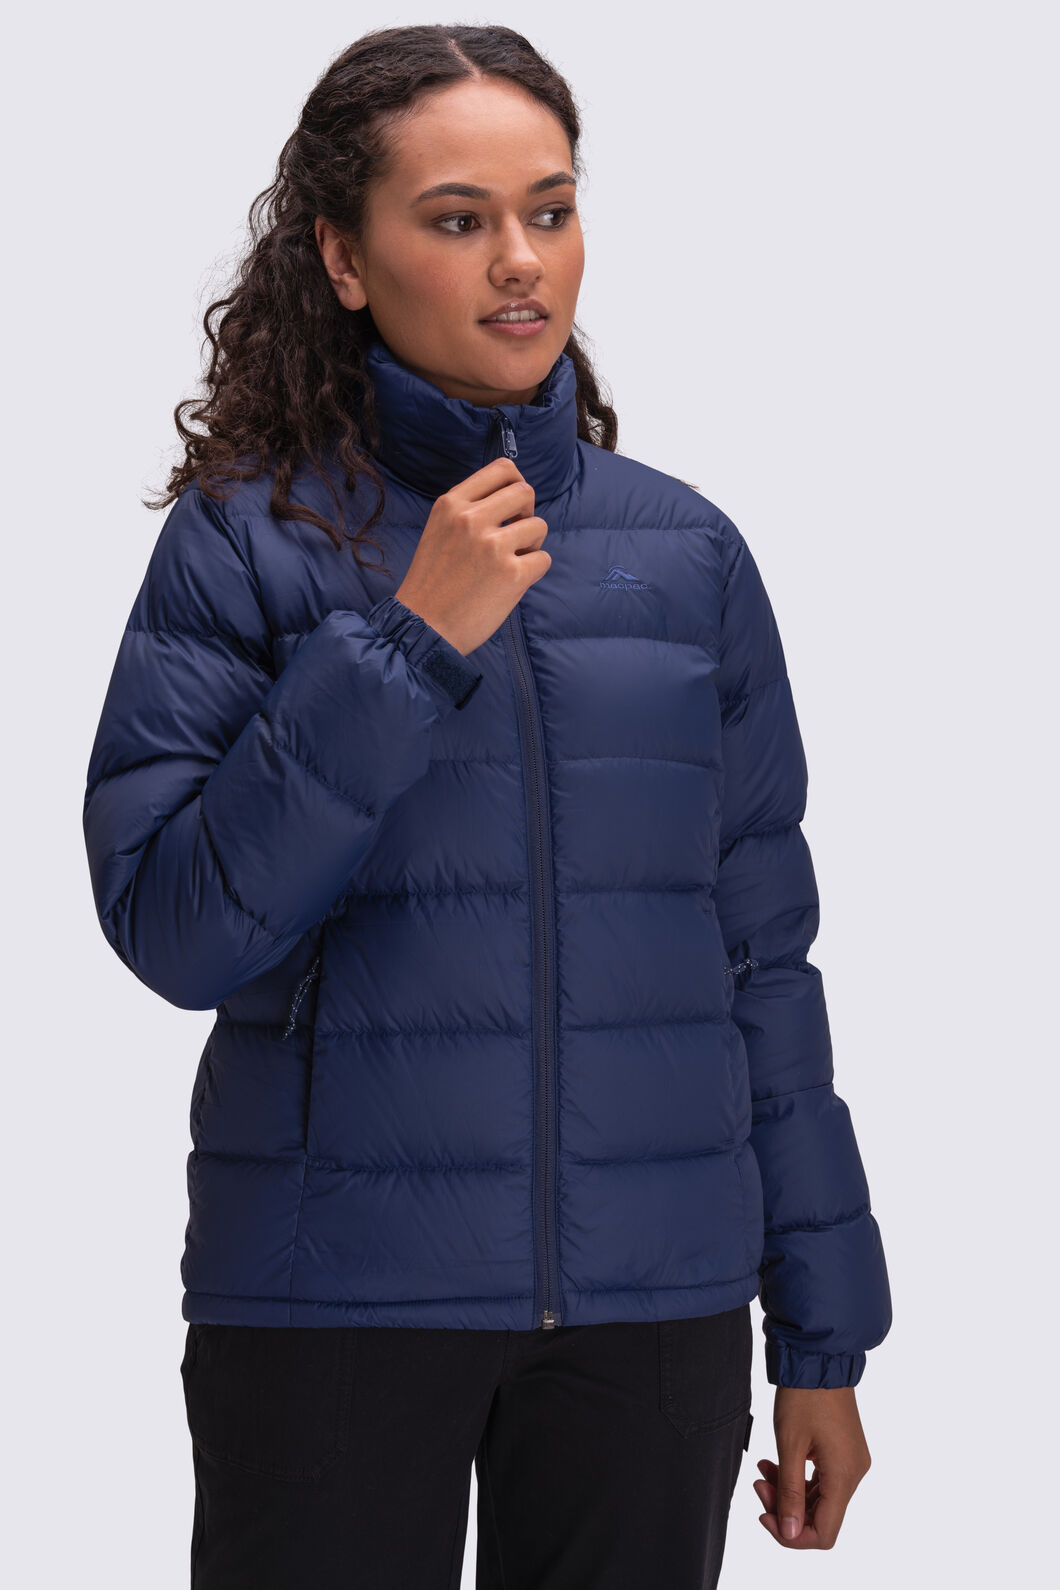 Unlock Wilderness' choice in the Macpac Vs North Face comparison, the Halo Down Jacket by Macpac